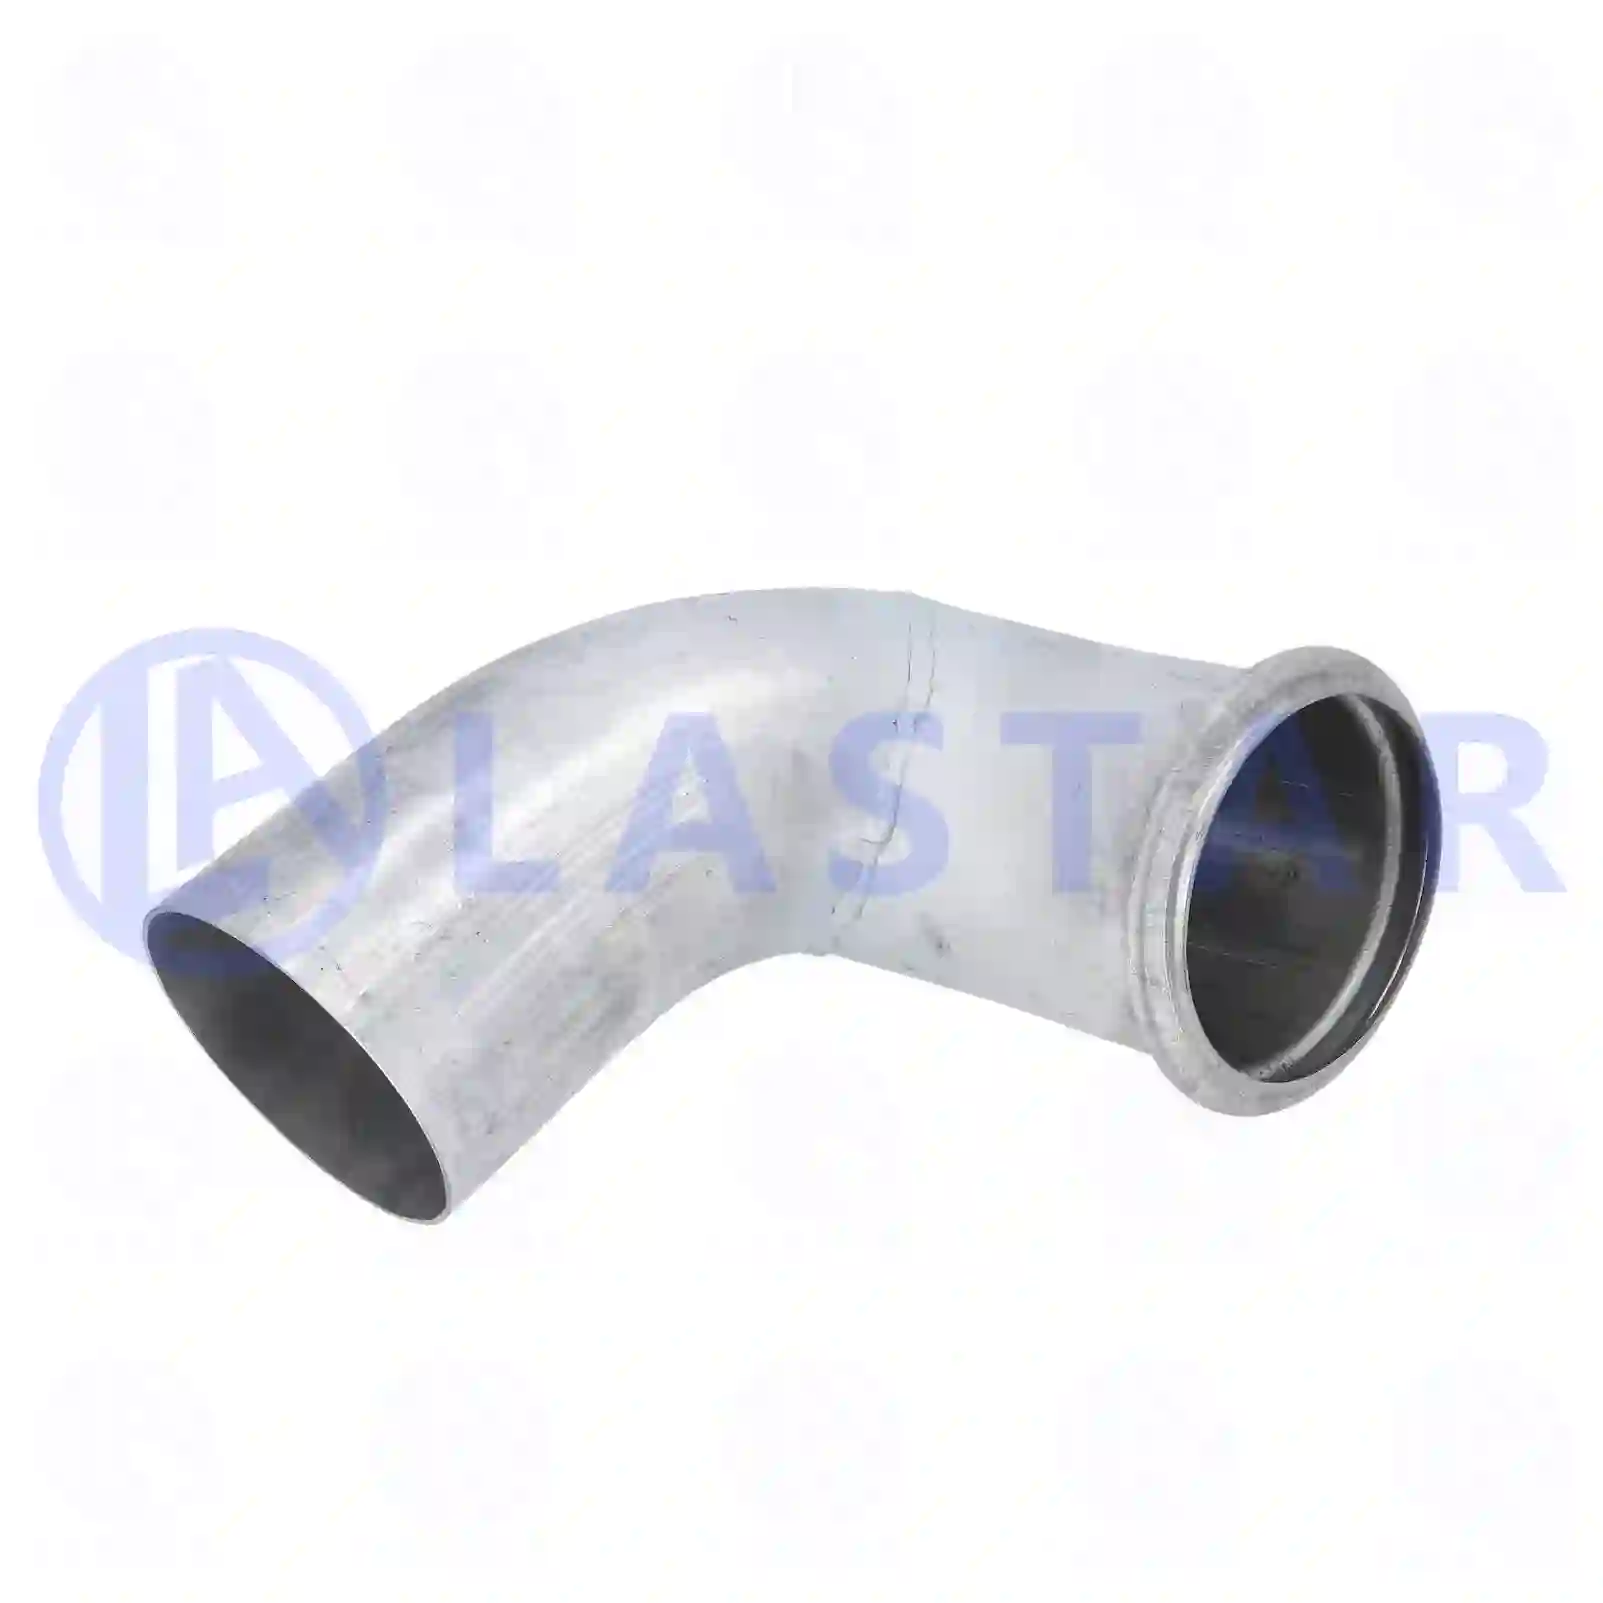 Exhaust pipe, 77706638, 7401629054, 1629 ||  77706638 Lastar Spare Part | Truck Spare Parts, Auotomotive Spare Parts Exhaust pipe, 77706638, 7401629054, 1629 ||  77706638 Lastar Spare Part | Truck Spare Parts, Auotomotive Spare Parts